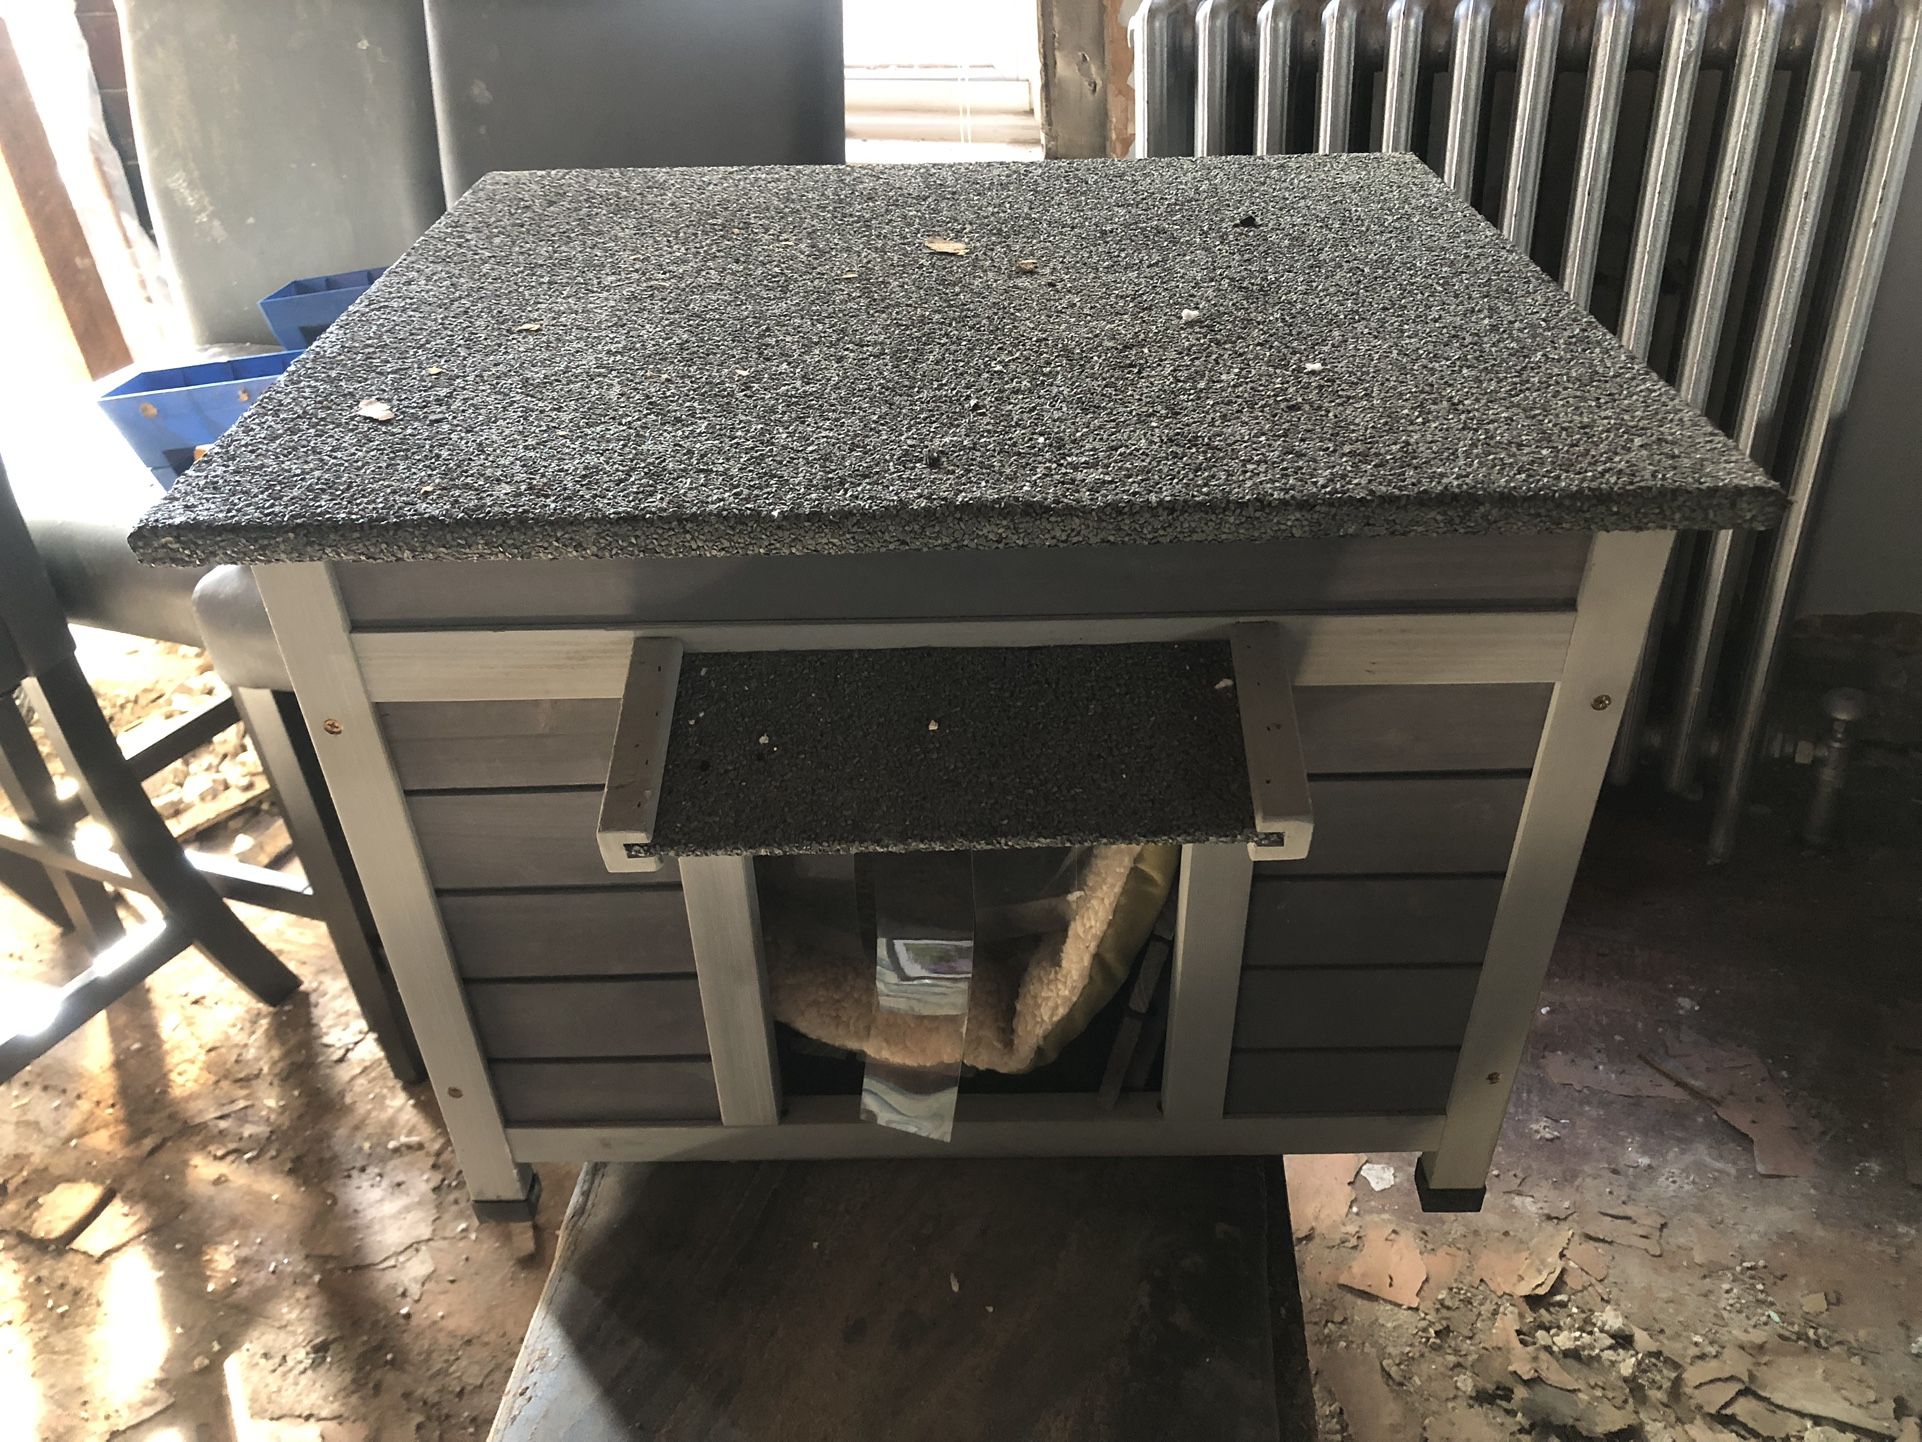 Small Dog House 